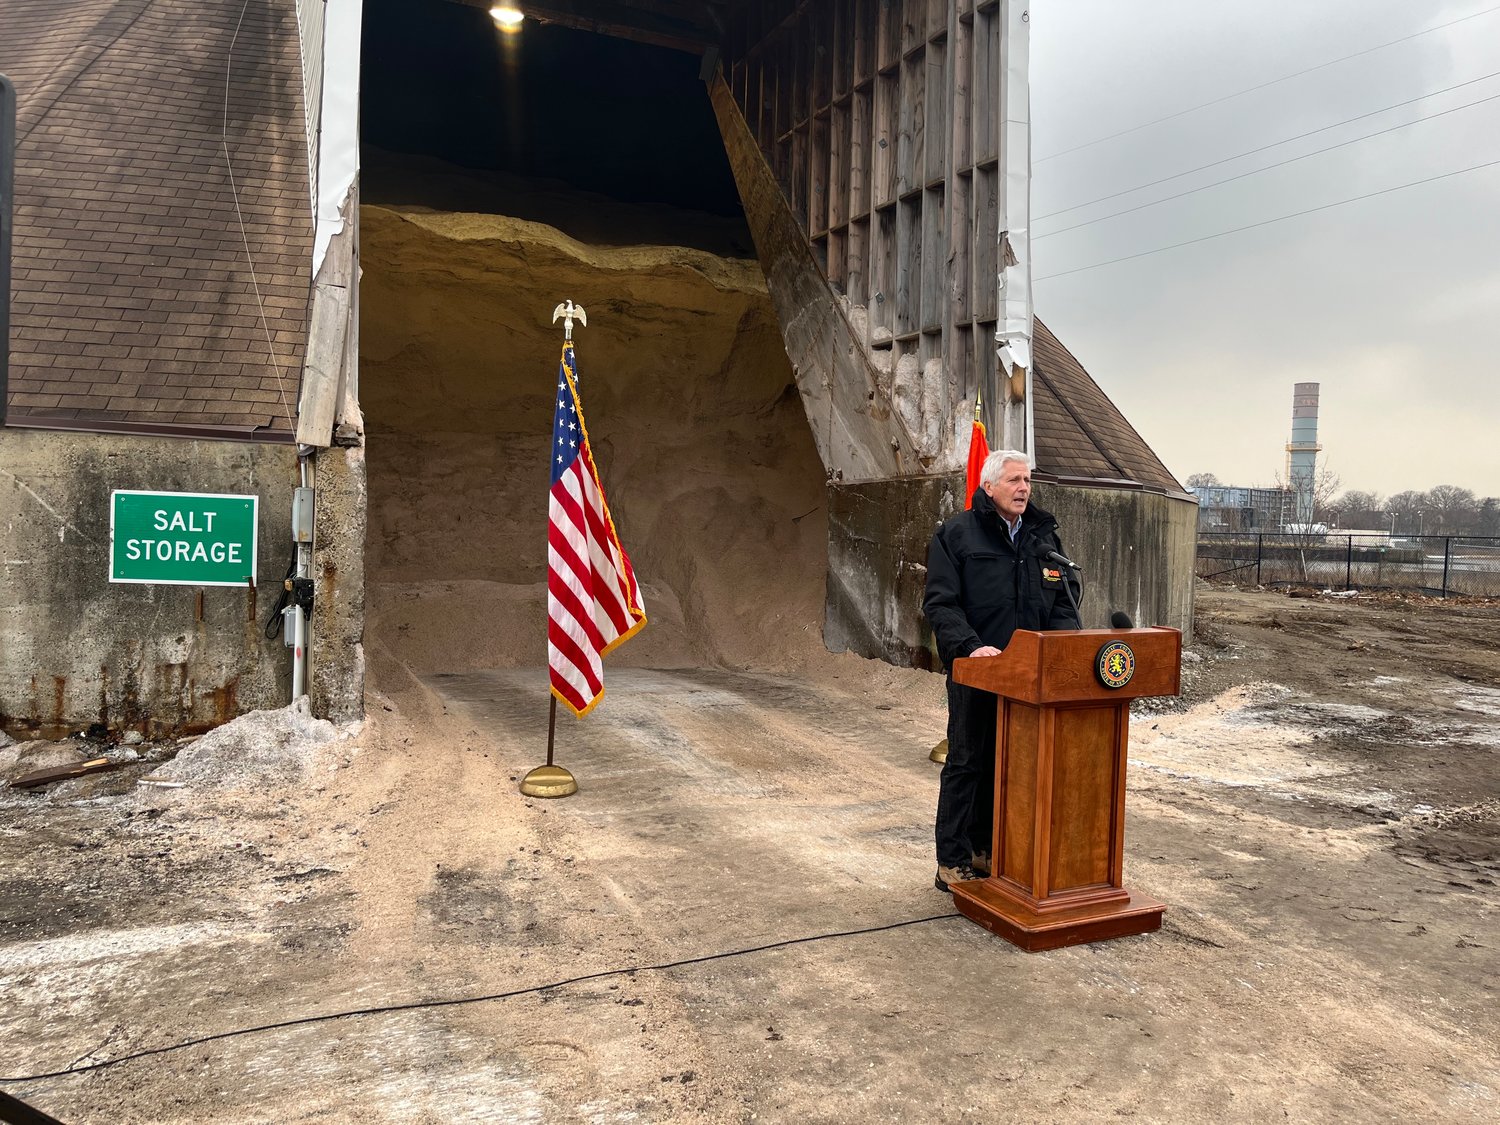 Nassau County Executive Bruce Blakeman was at the county's sand and salt yard in Inwood Friday afternoon to discuss plans to cope with the weekend's impending snowstorm.